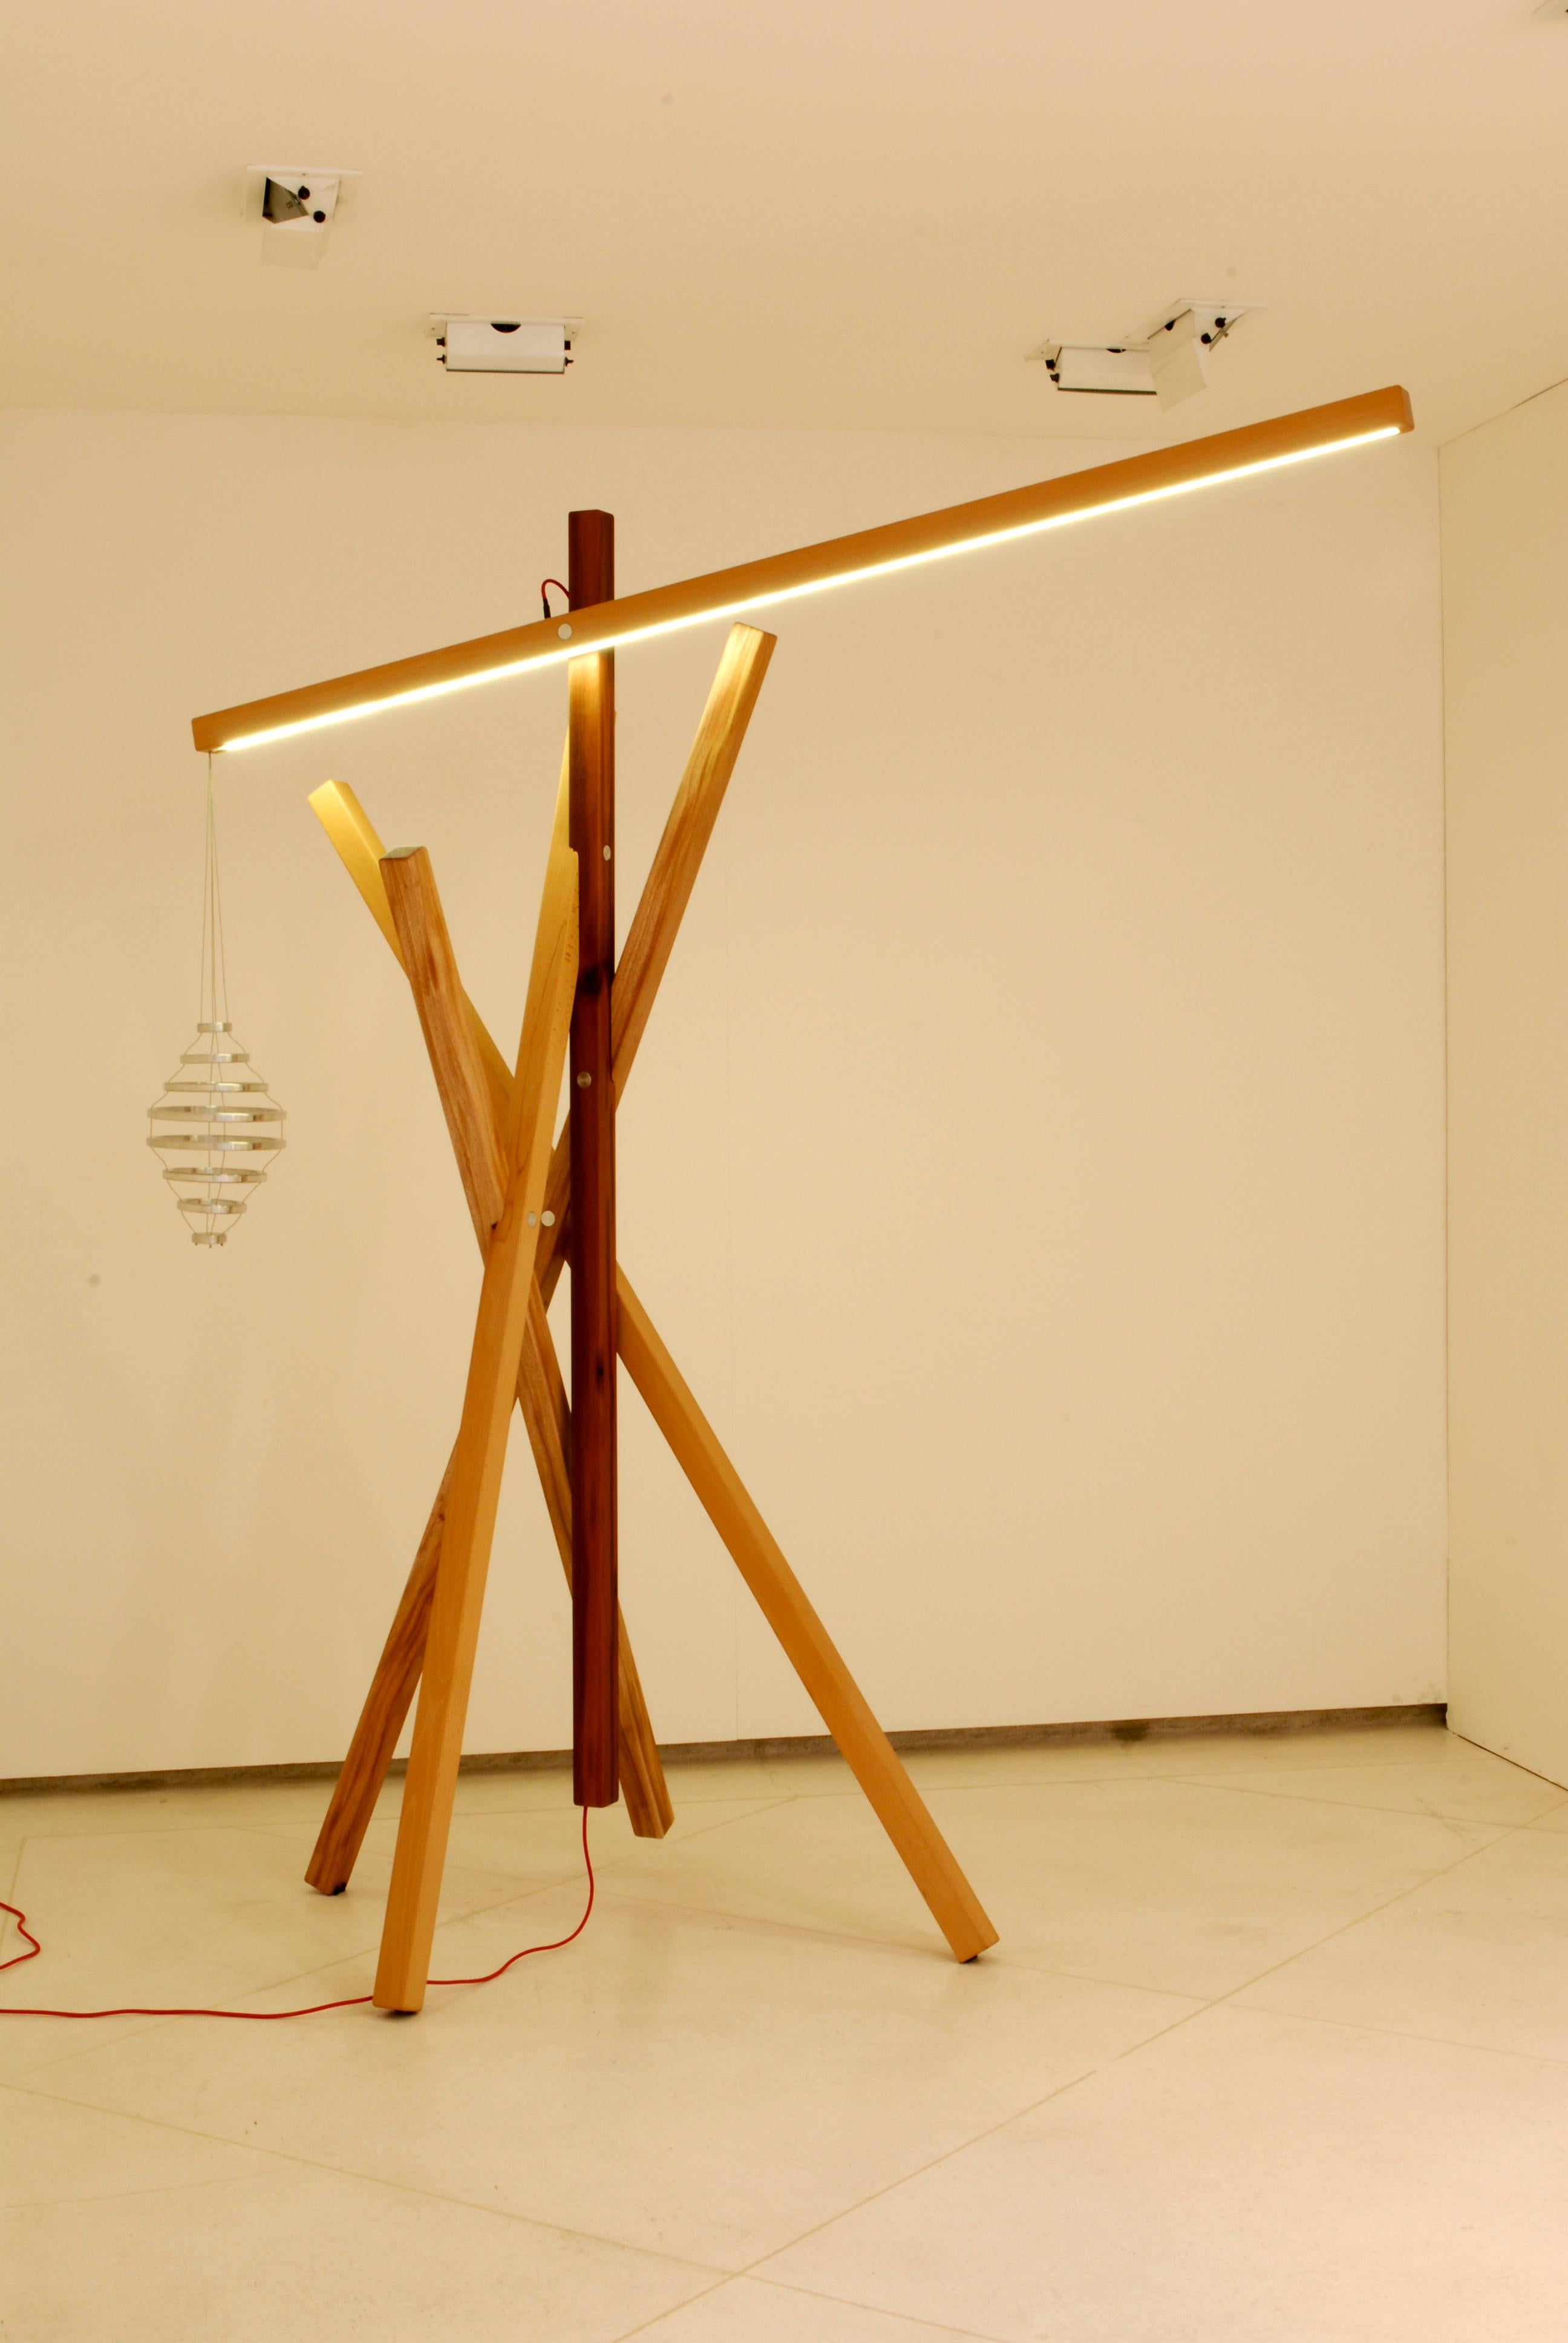 Ninho floor lamp by Mameluca
Material: maçaranduba, african mahogany, faya
Dimensions: D 220x W 100 x H 190 cm

All our lamps can be wired according to each country. If sold to the USA it will be wired for the USA for instance.

In order to